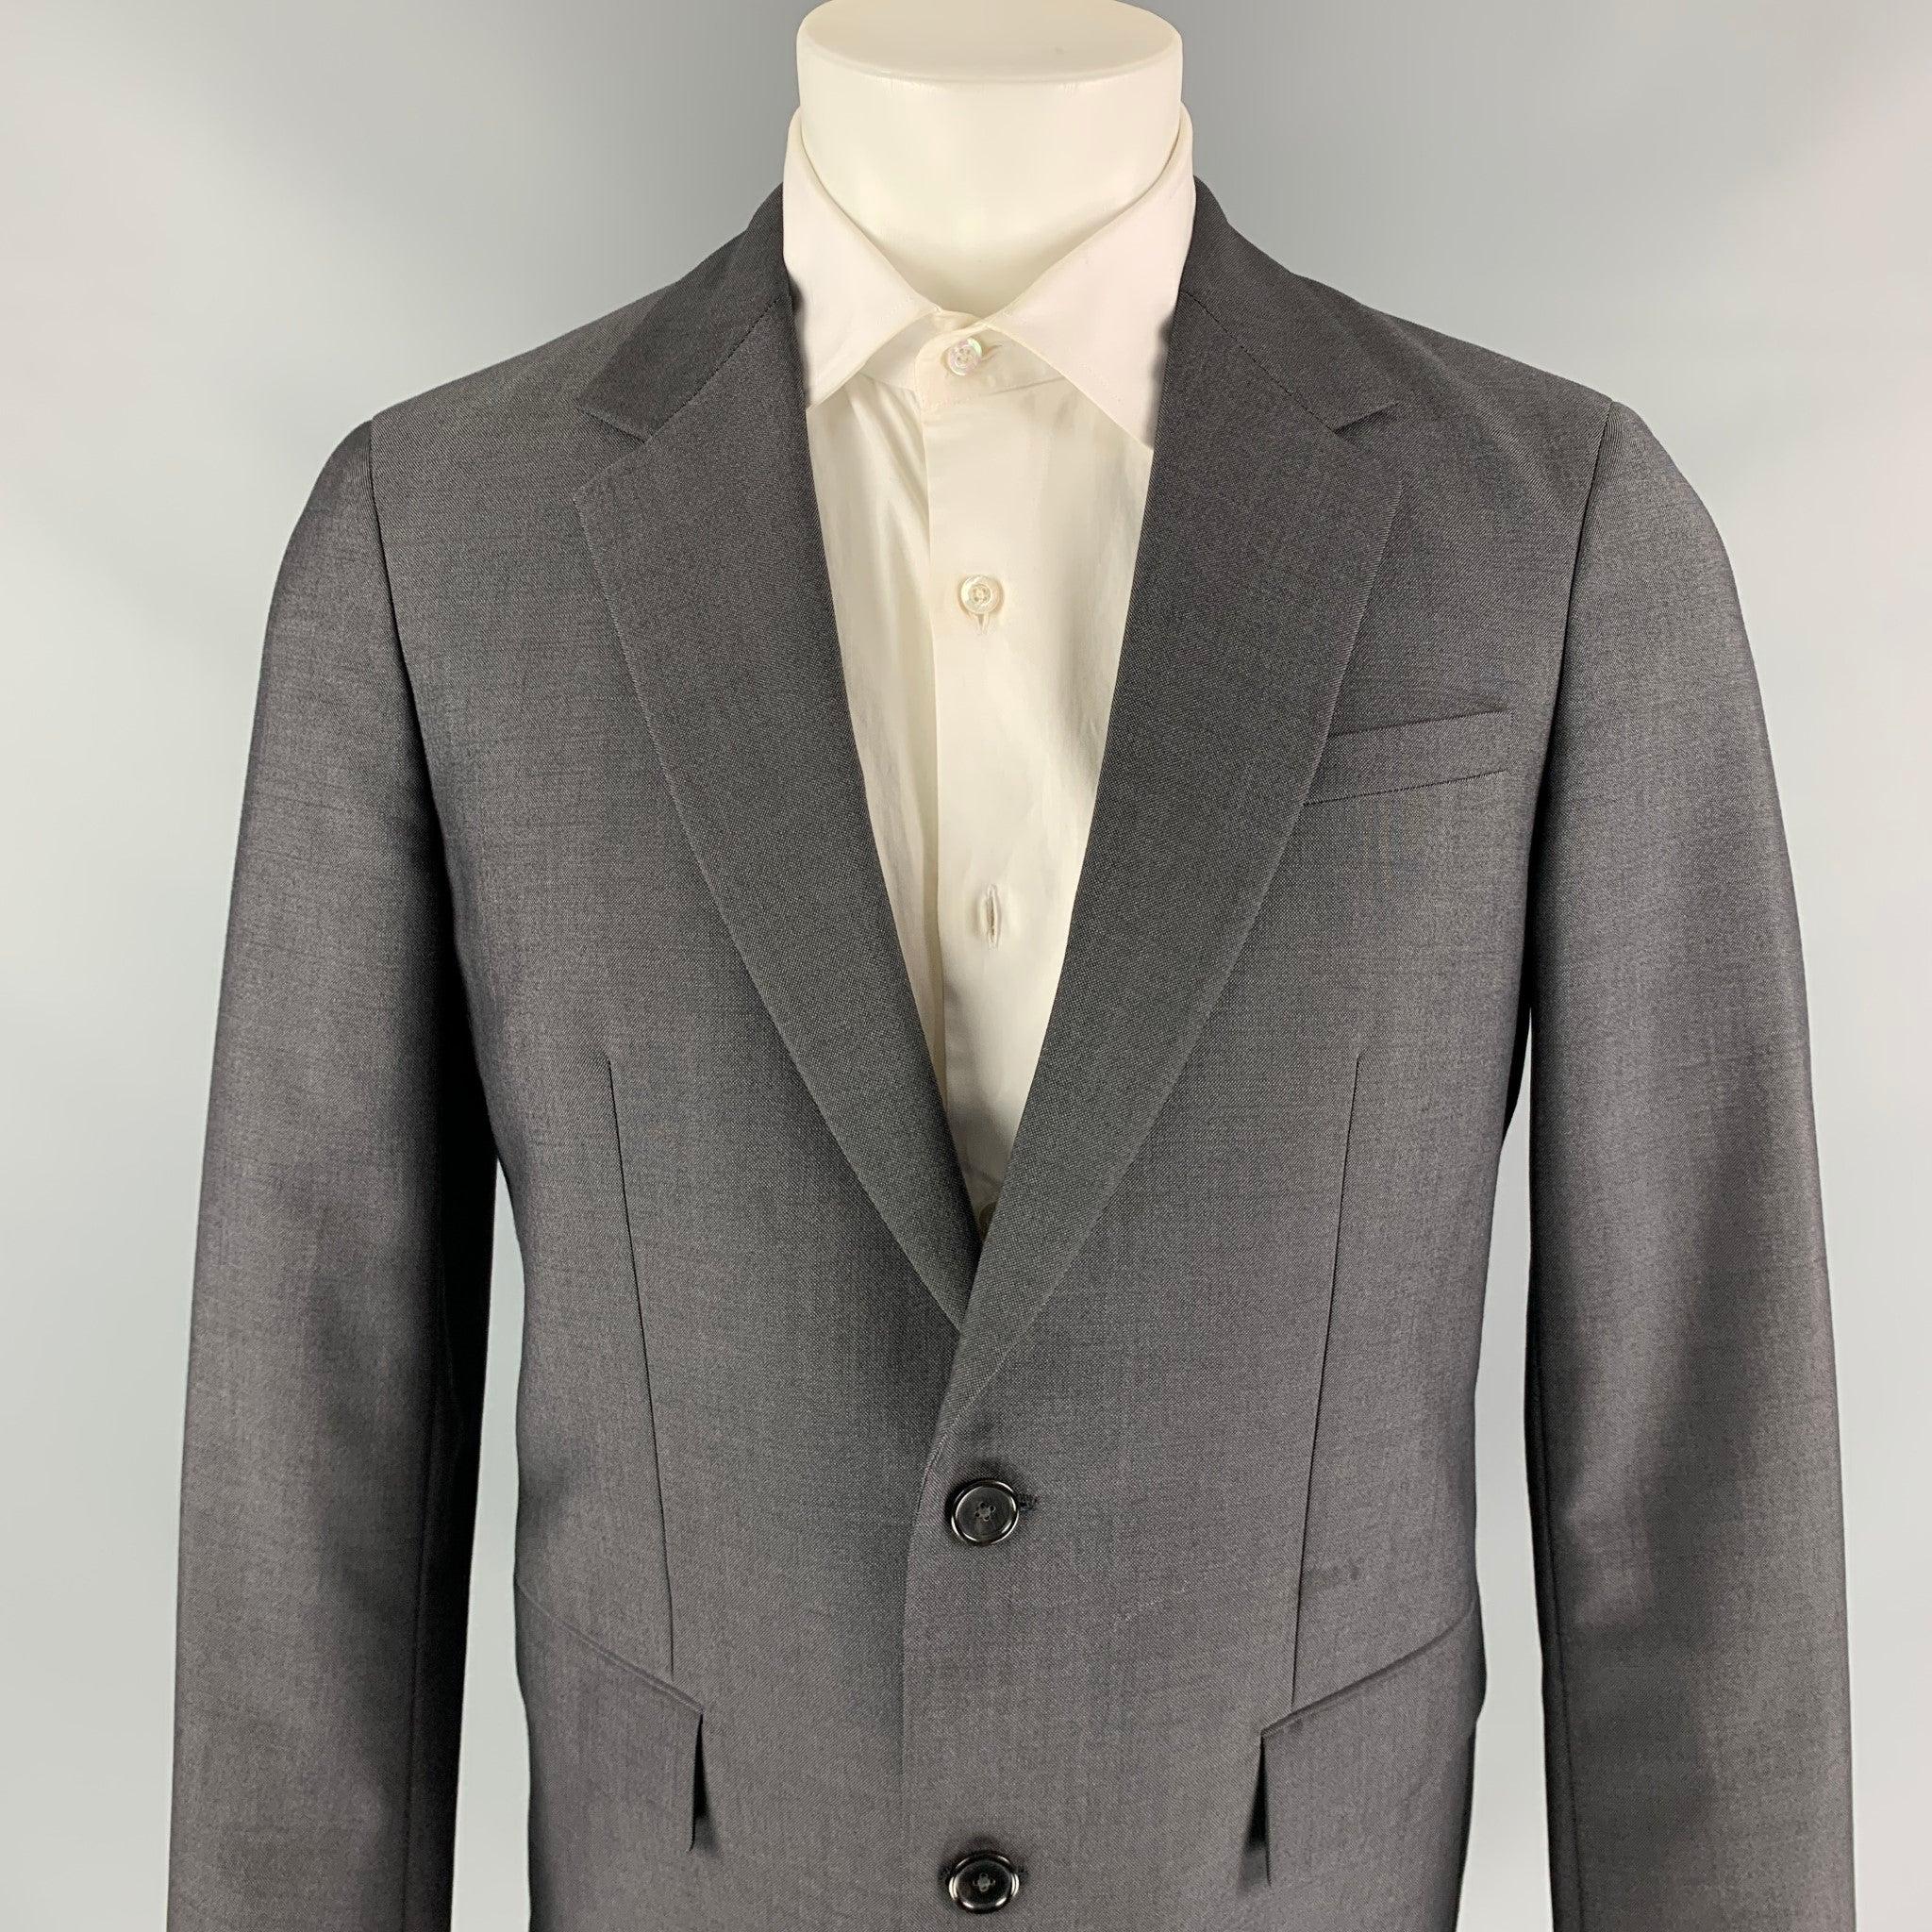 JIL SANDER sport coat comes in a dark gray wool / mohair with a full liner featuring notch lapel, flap pockets, and a two button closure. Made in Italy.Very Good
Pre-Owned Condition. 

Marked:   48 

Measurements: 
 
Shoulder: 17.5 inches  Chest: 40